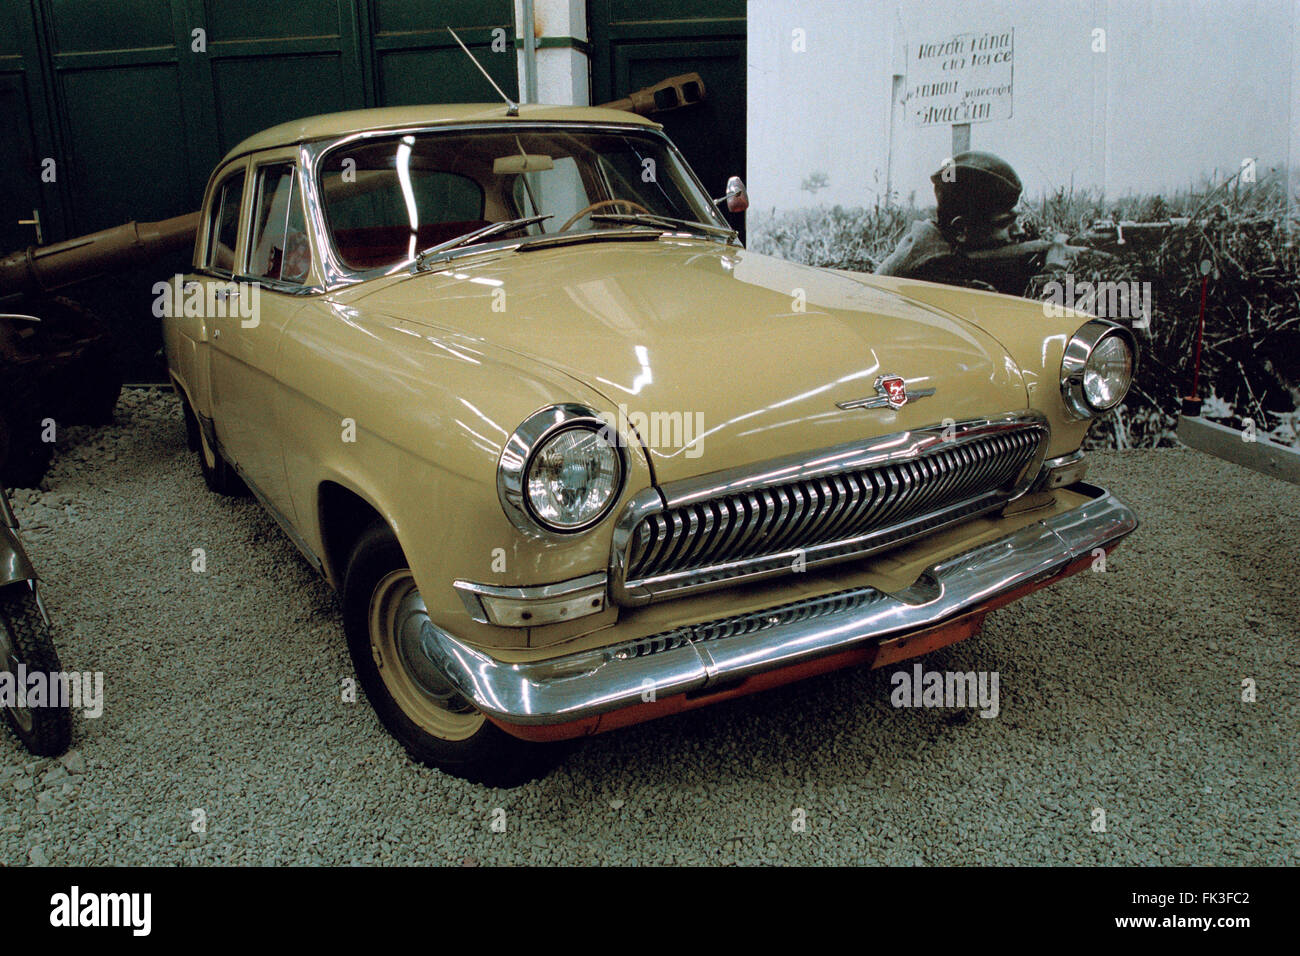 Soviet automobile GAZ M21 Volga produced by the GAZ automobile plant (1962) displayed in the Military Technical Museum in Lesany, Czech Republic. Stock Photo